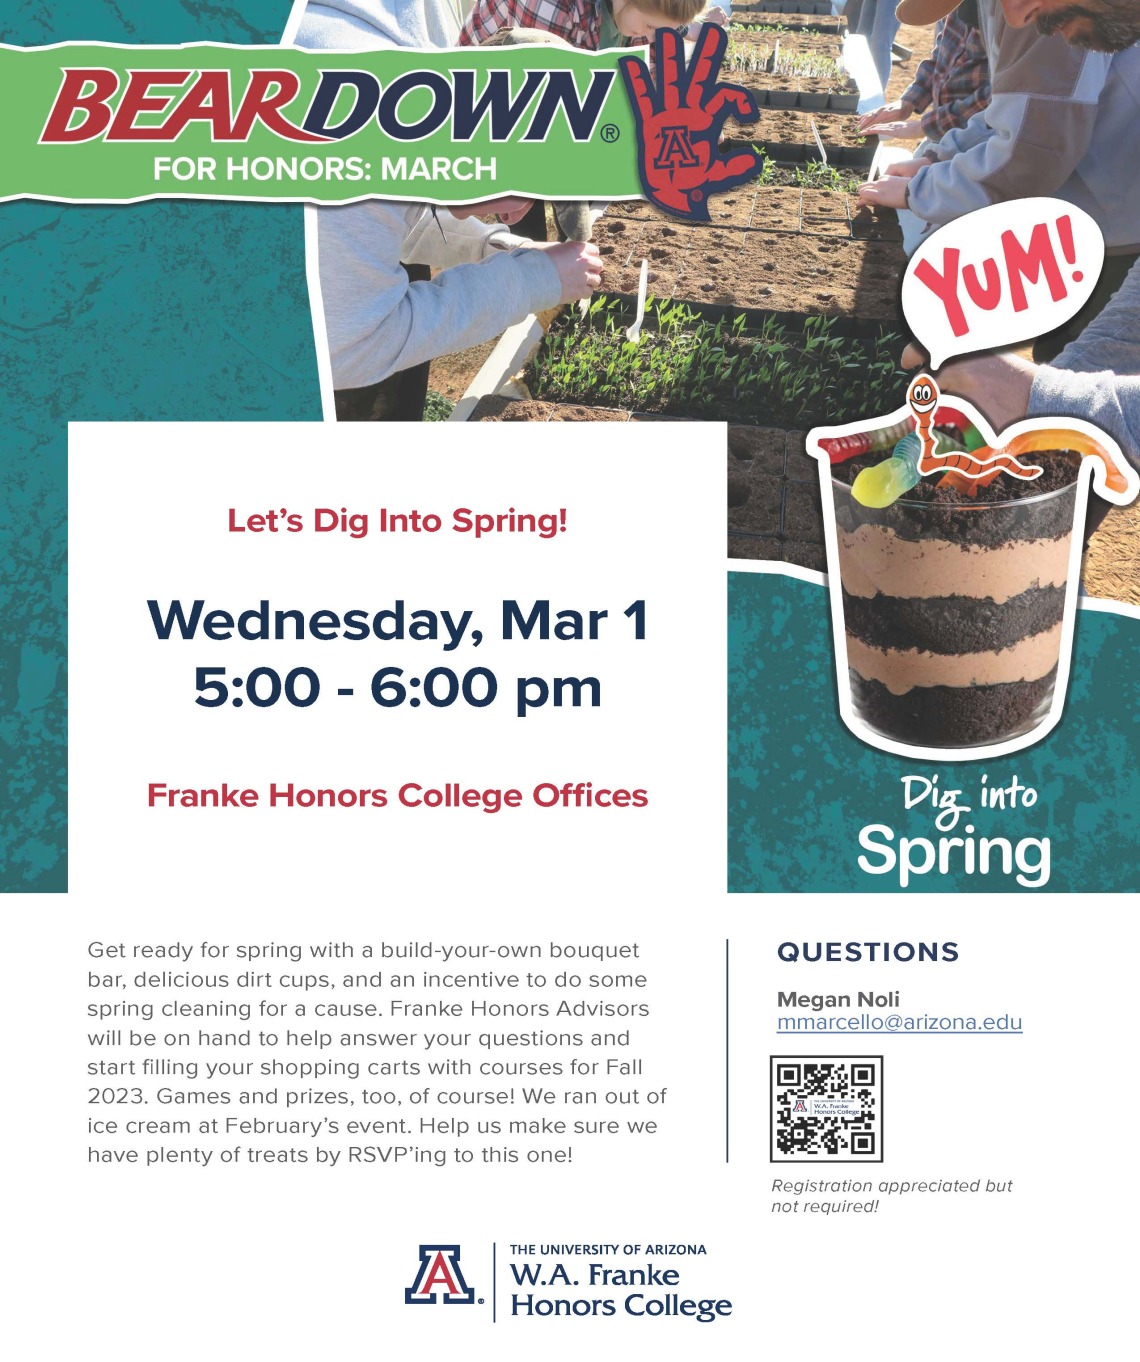 Bear Down for Honors March: Dig Into Spring Flyer